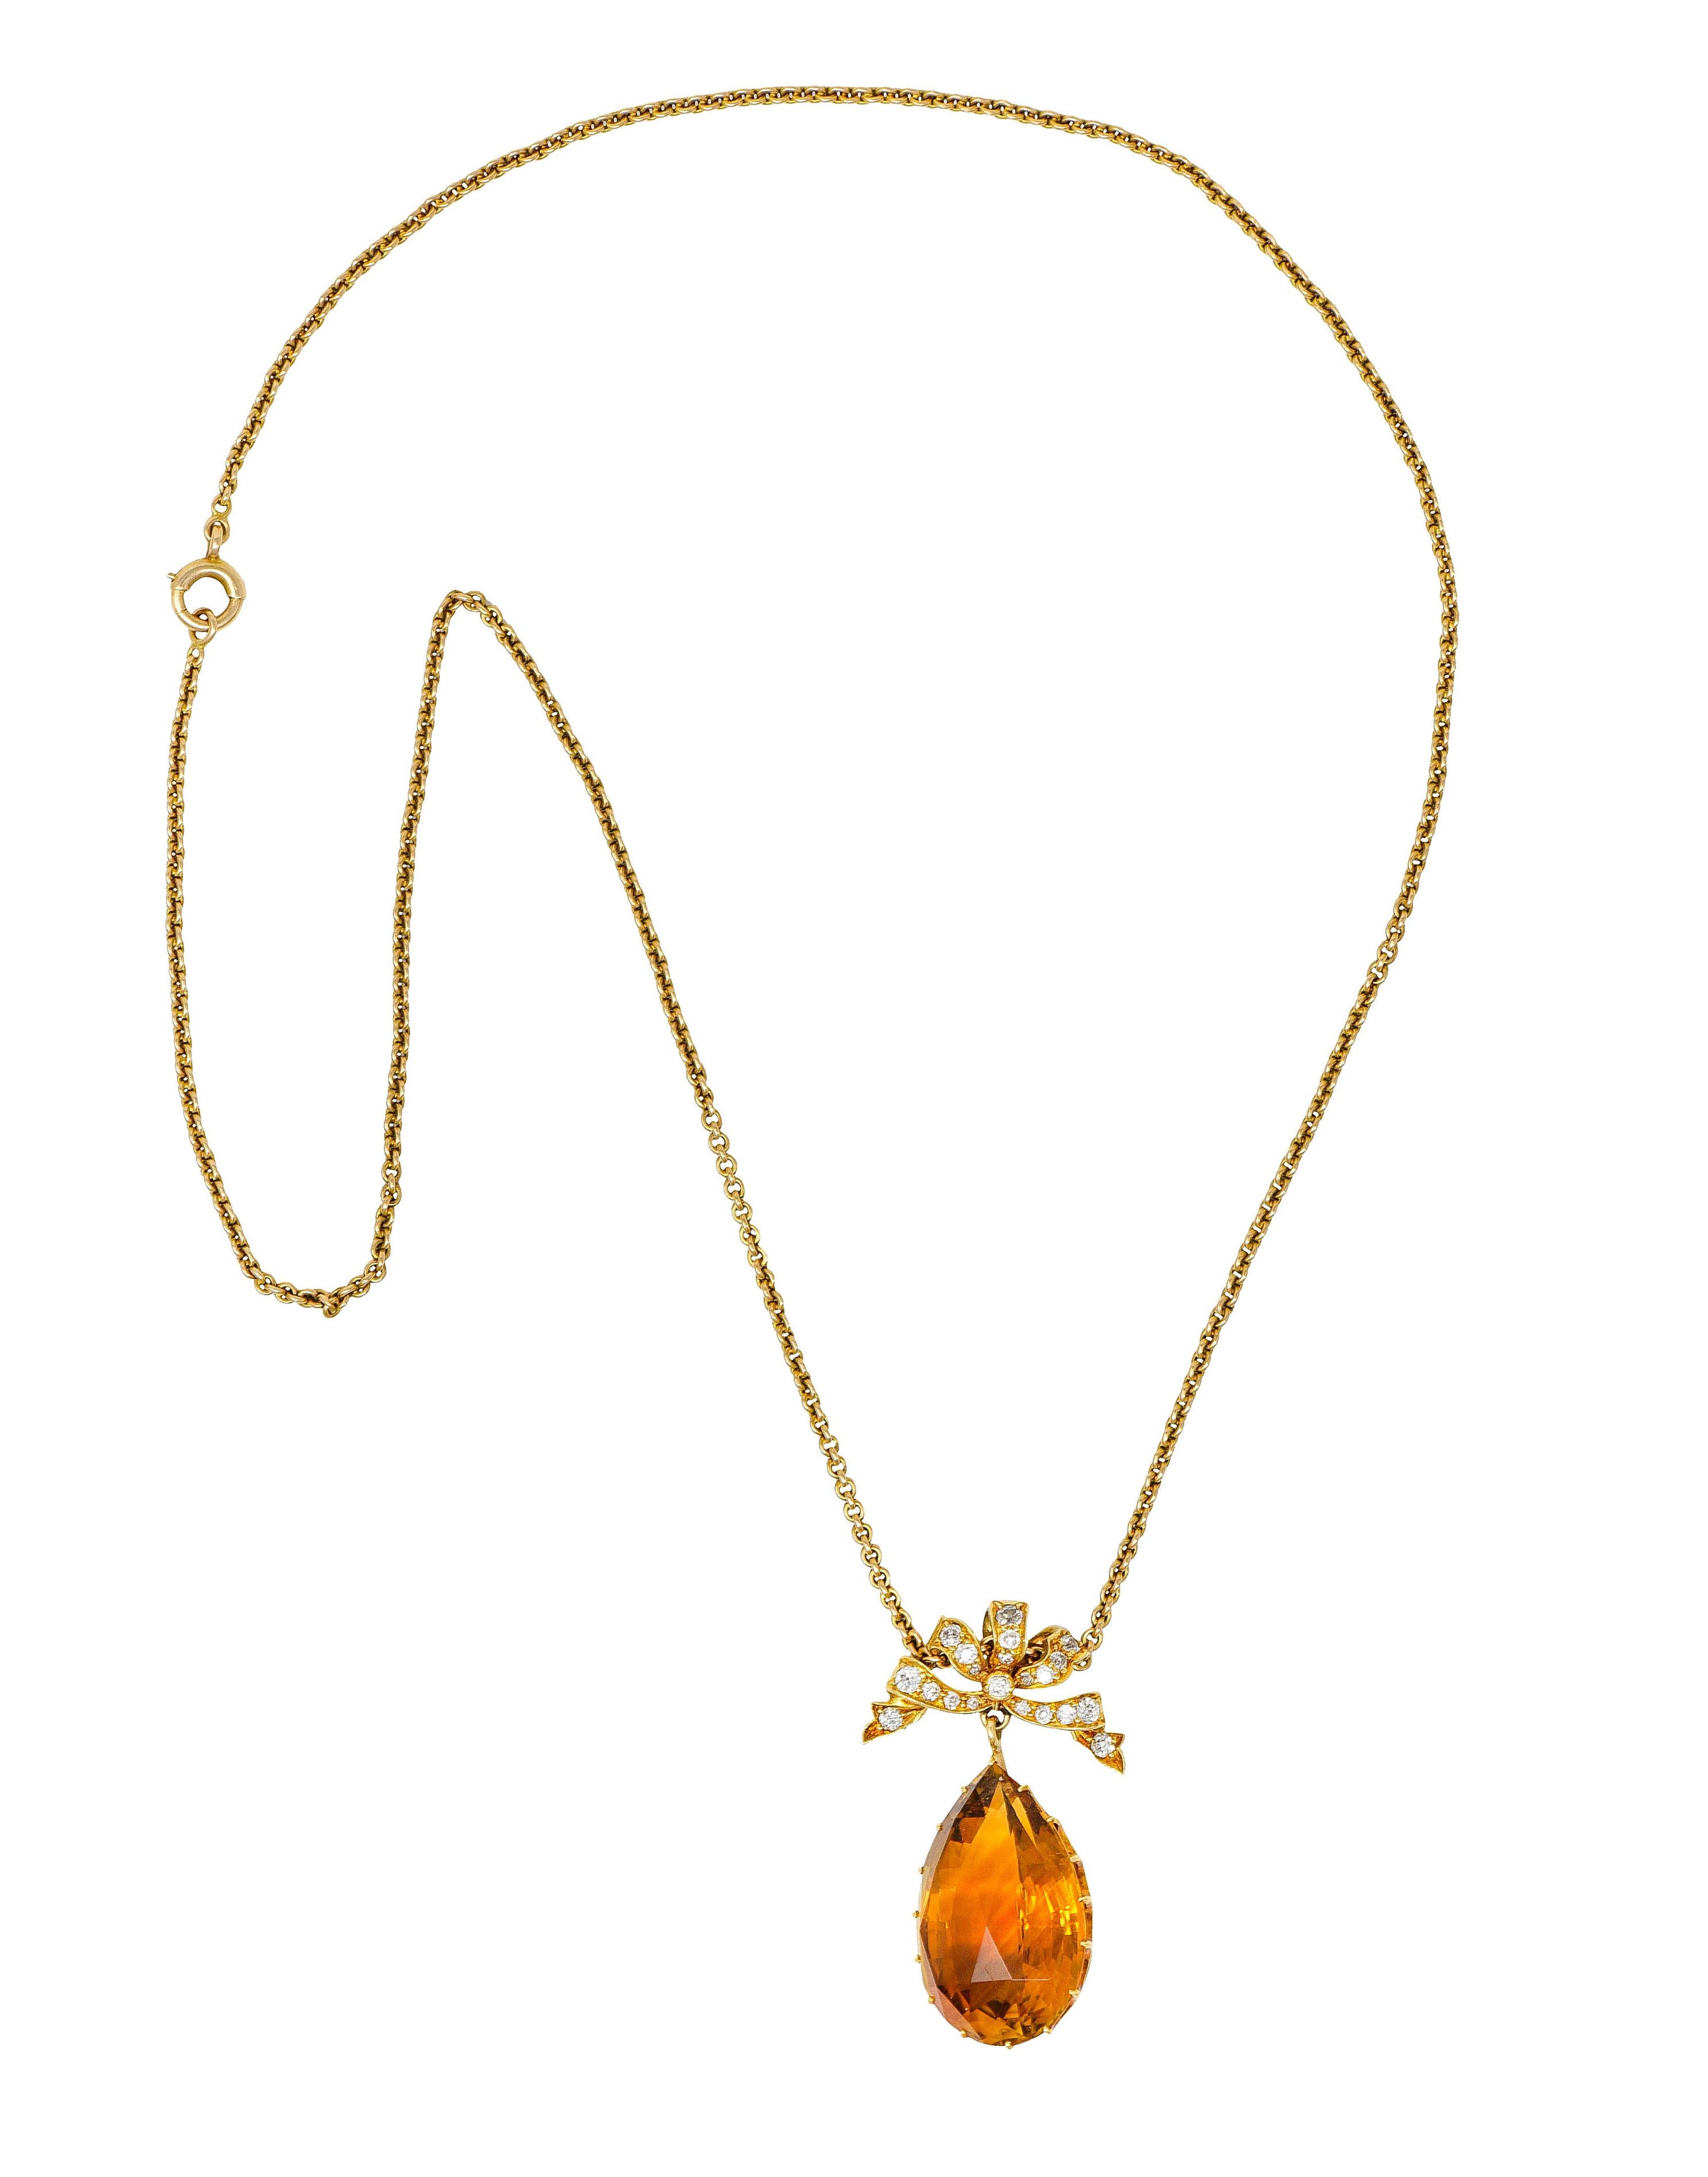 Cable chain necklace suspends a pendant with a ribboned surmount with a citrine drop

Bow is bead set with old European cut diamonds

Weighing in total approximately 0.50 carat - G to J color with SI clarity

Mixed pear cut citrine is transparent